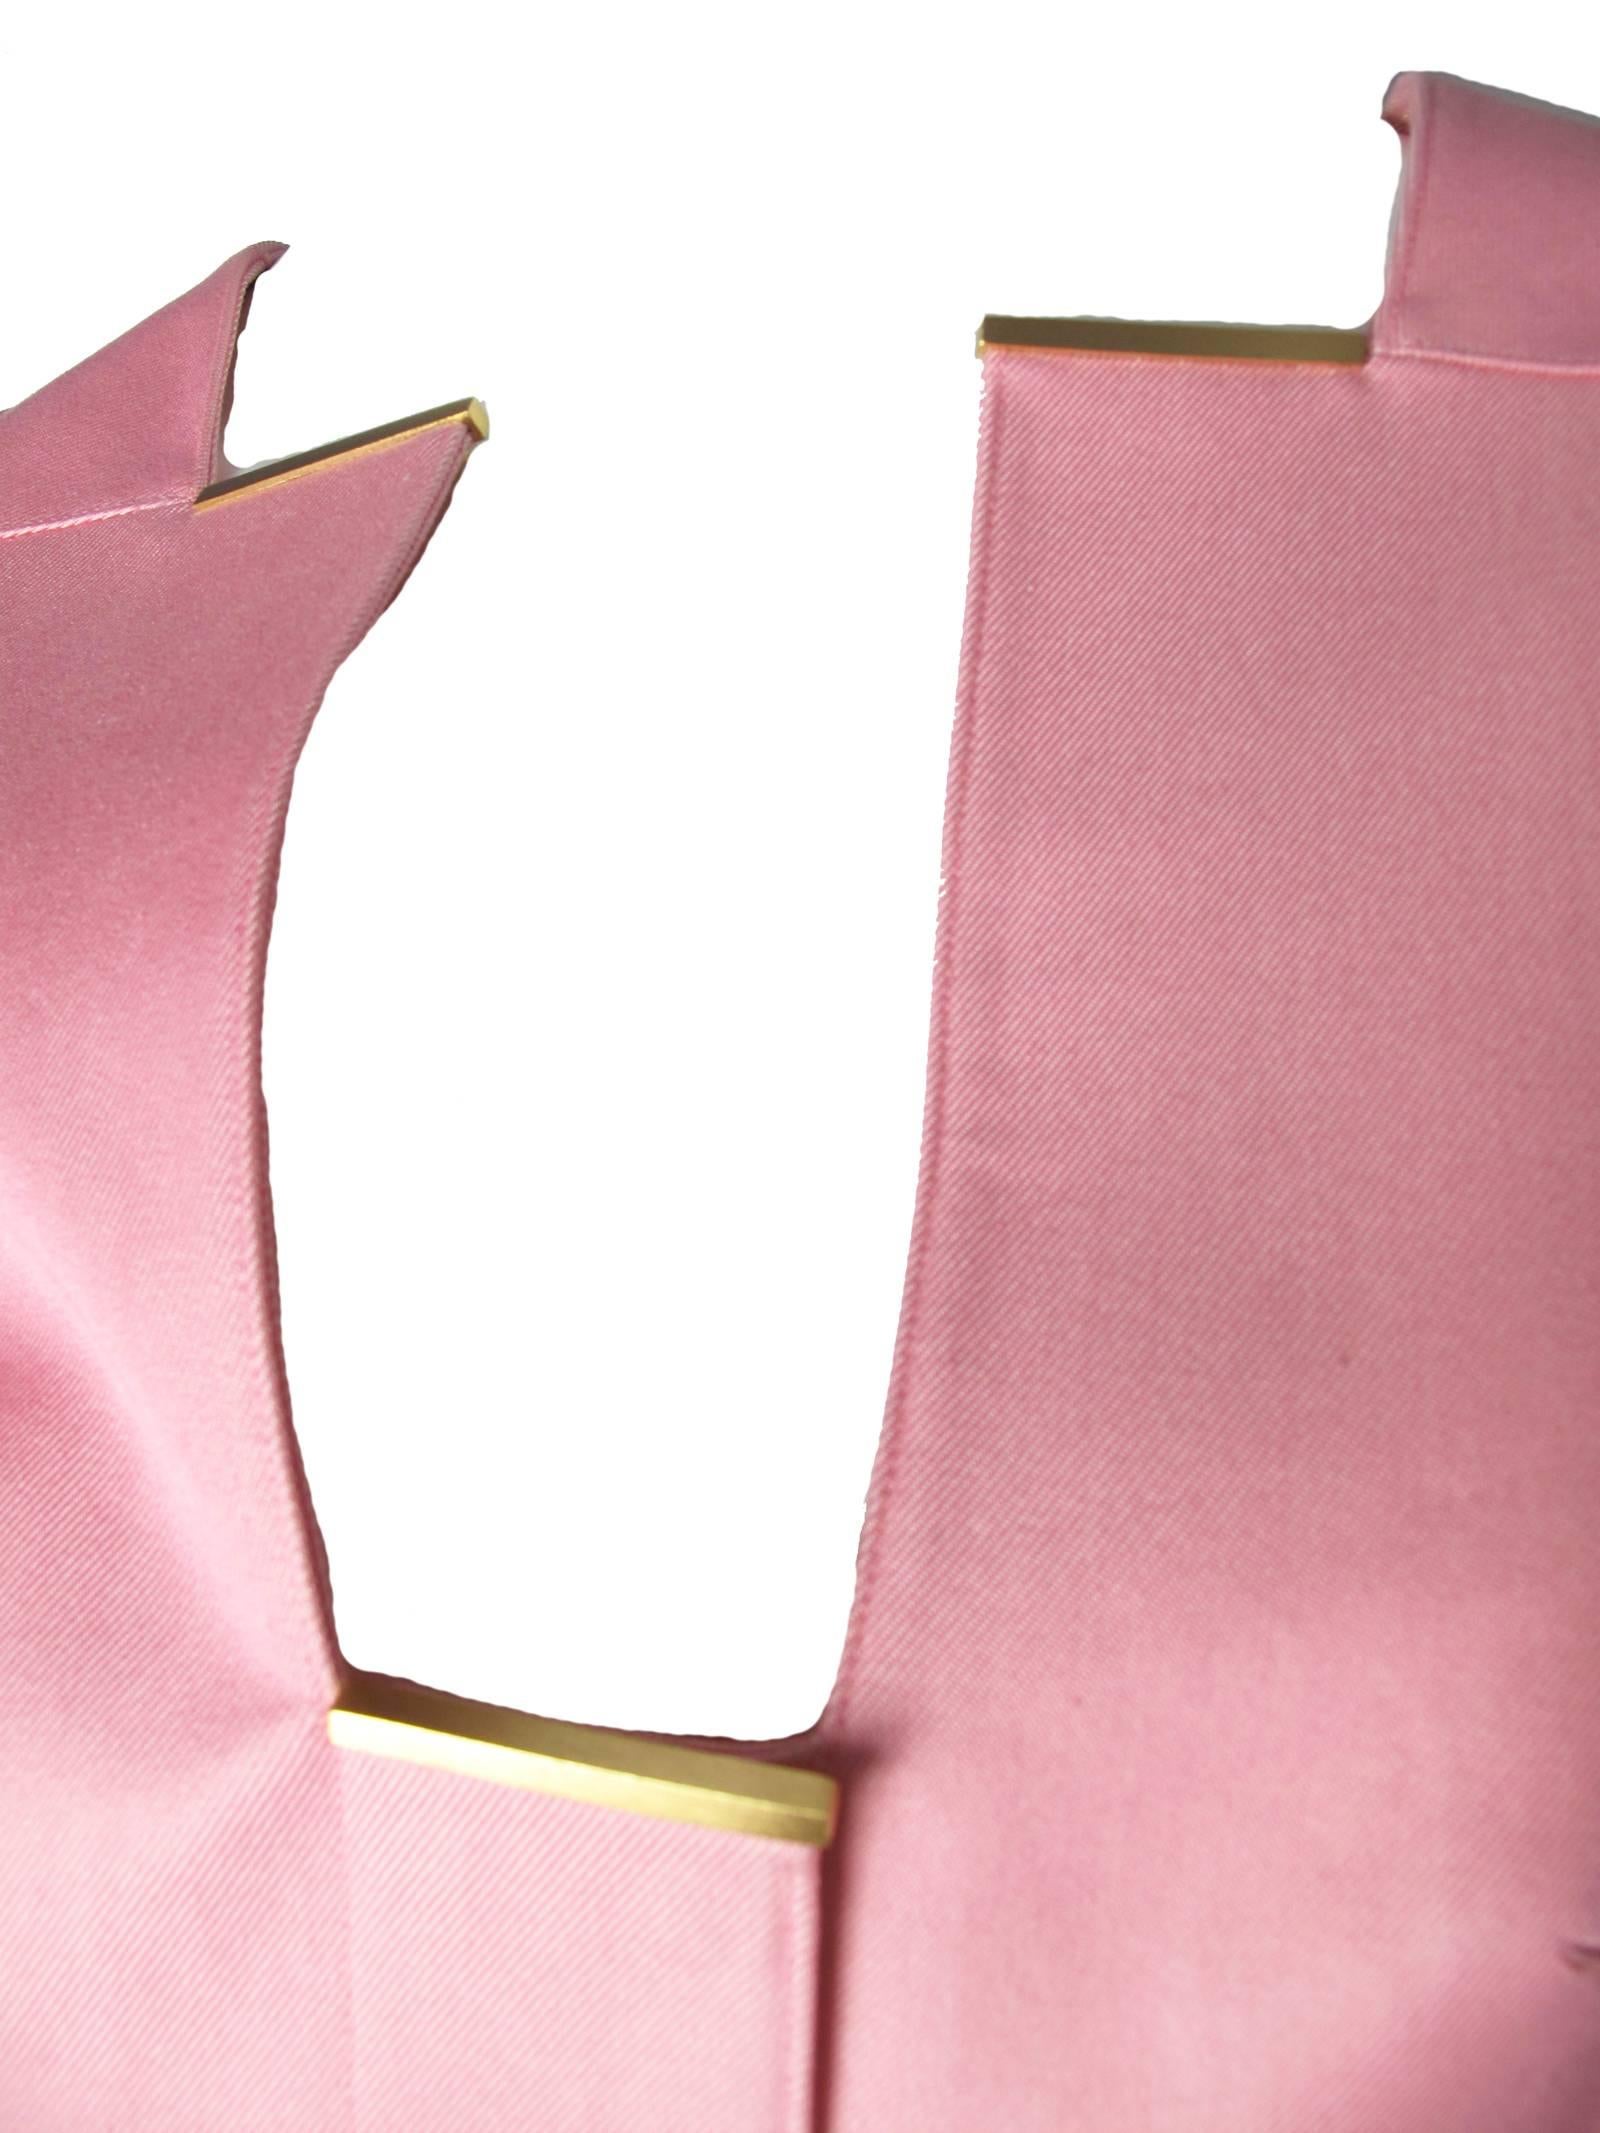 Thierry Mugler silk and cotton pink suit with metal accents.  Condition: Very good. 
Size 40
Jacket: 36